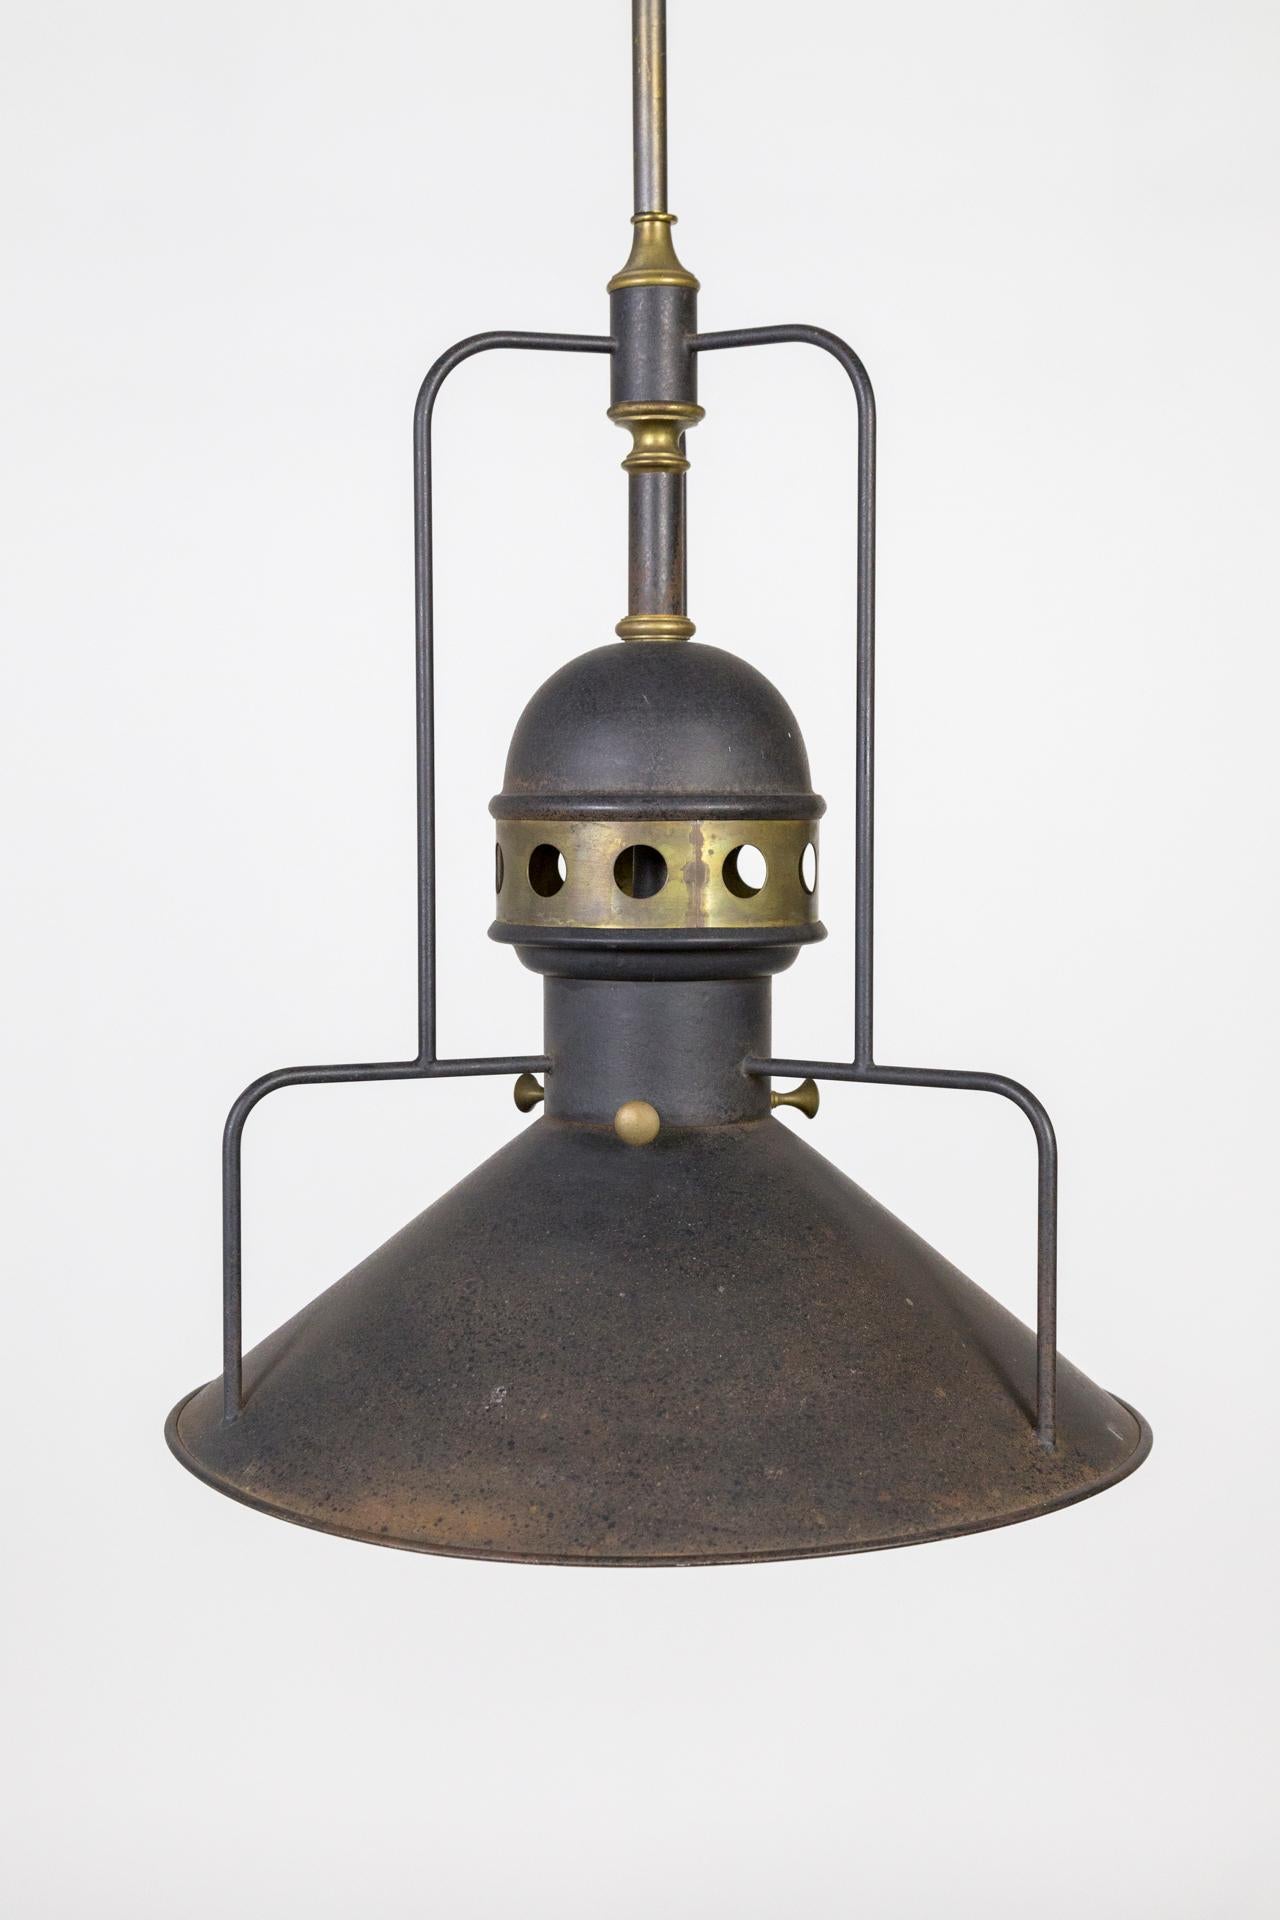 A large, unique, mixed metal light in dark bonze color with brass accents. The cogs were used to move the light along the work line and to raise and lower it. A striking example of industrial craftsmanship. American, circa 1905. Measures: 17.75